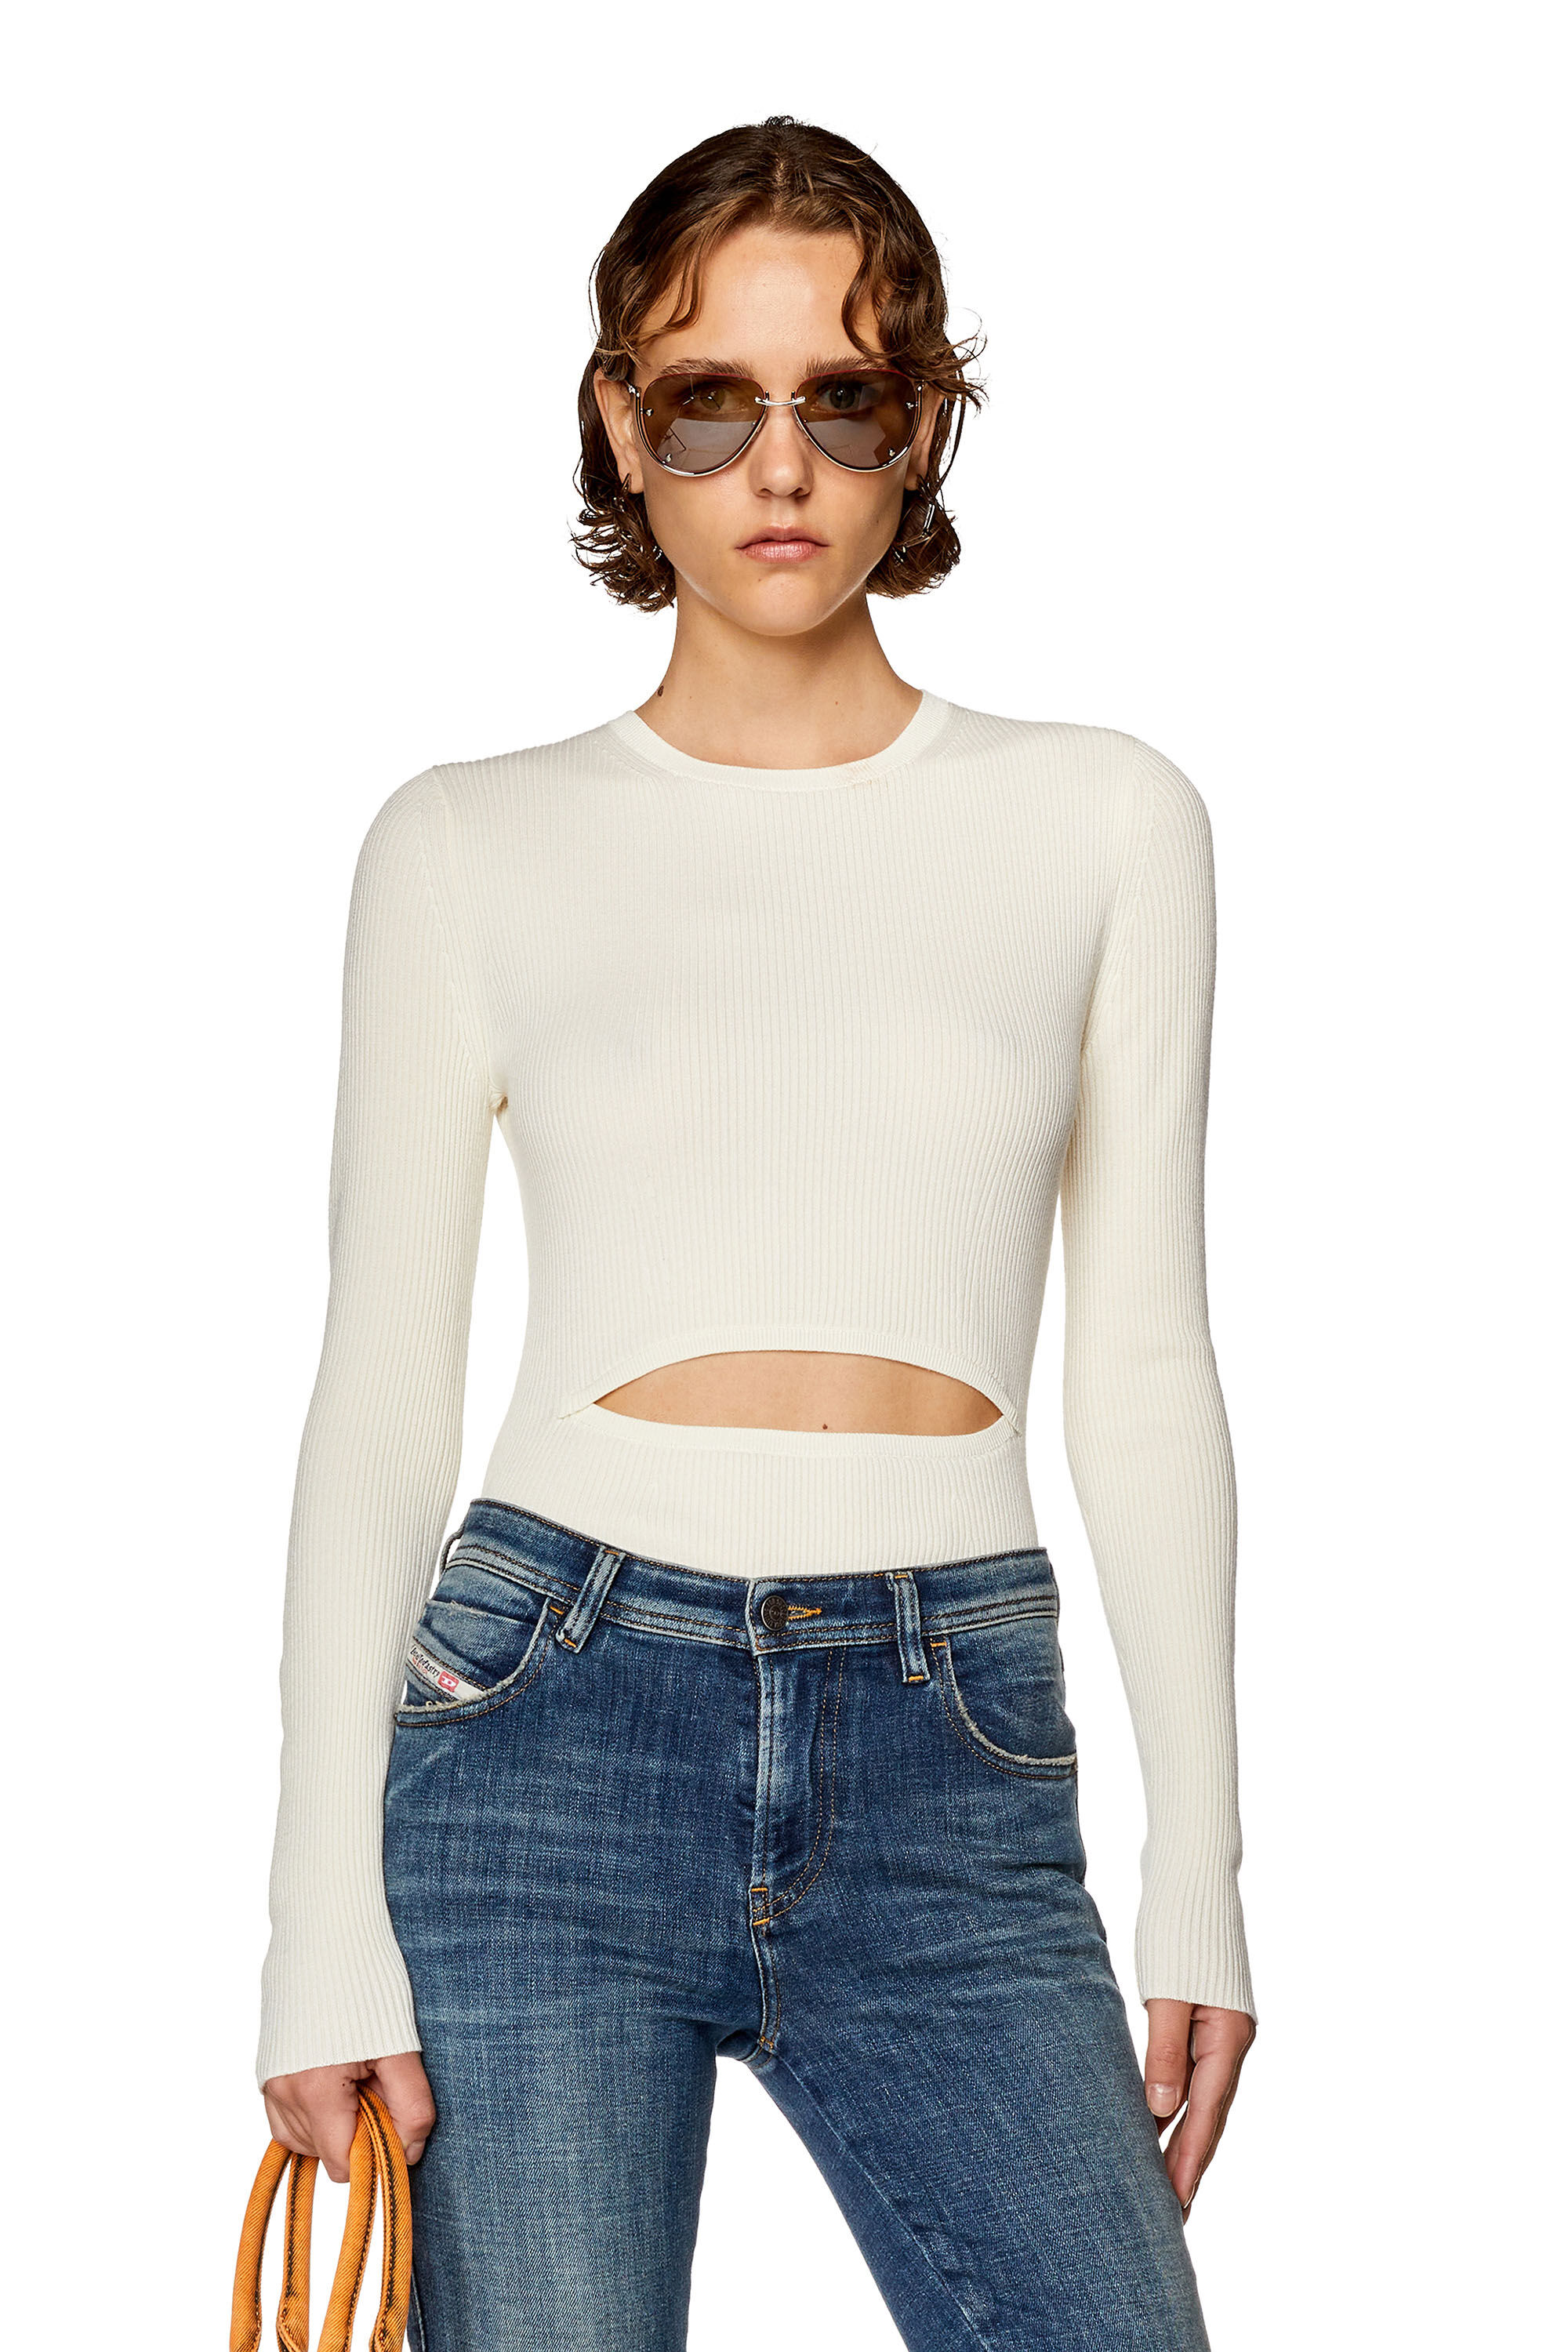 Diesel - M-PERIS, Woman Wool-blend top with cut-out in White - Image 3